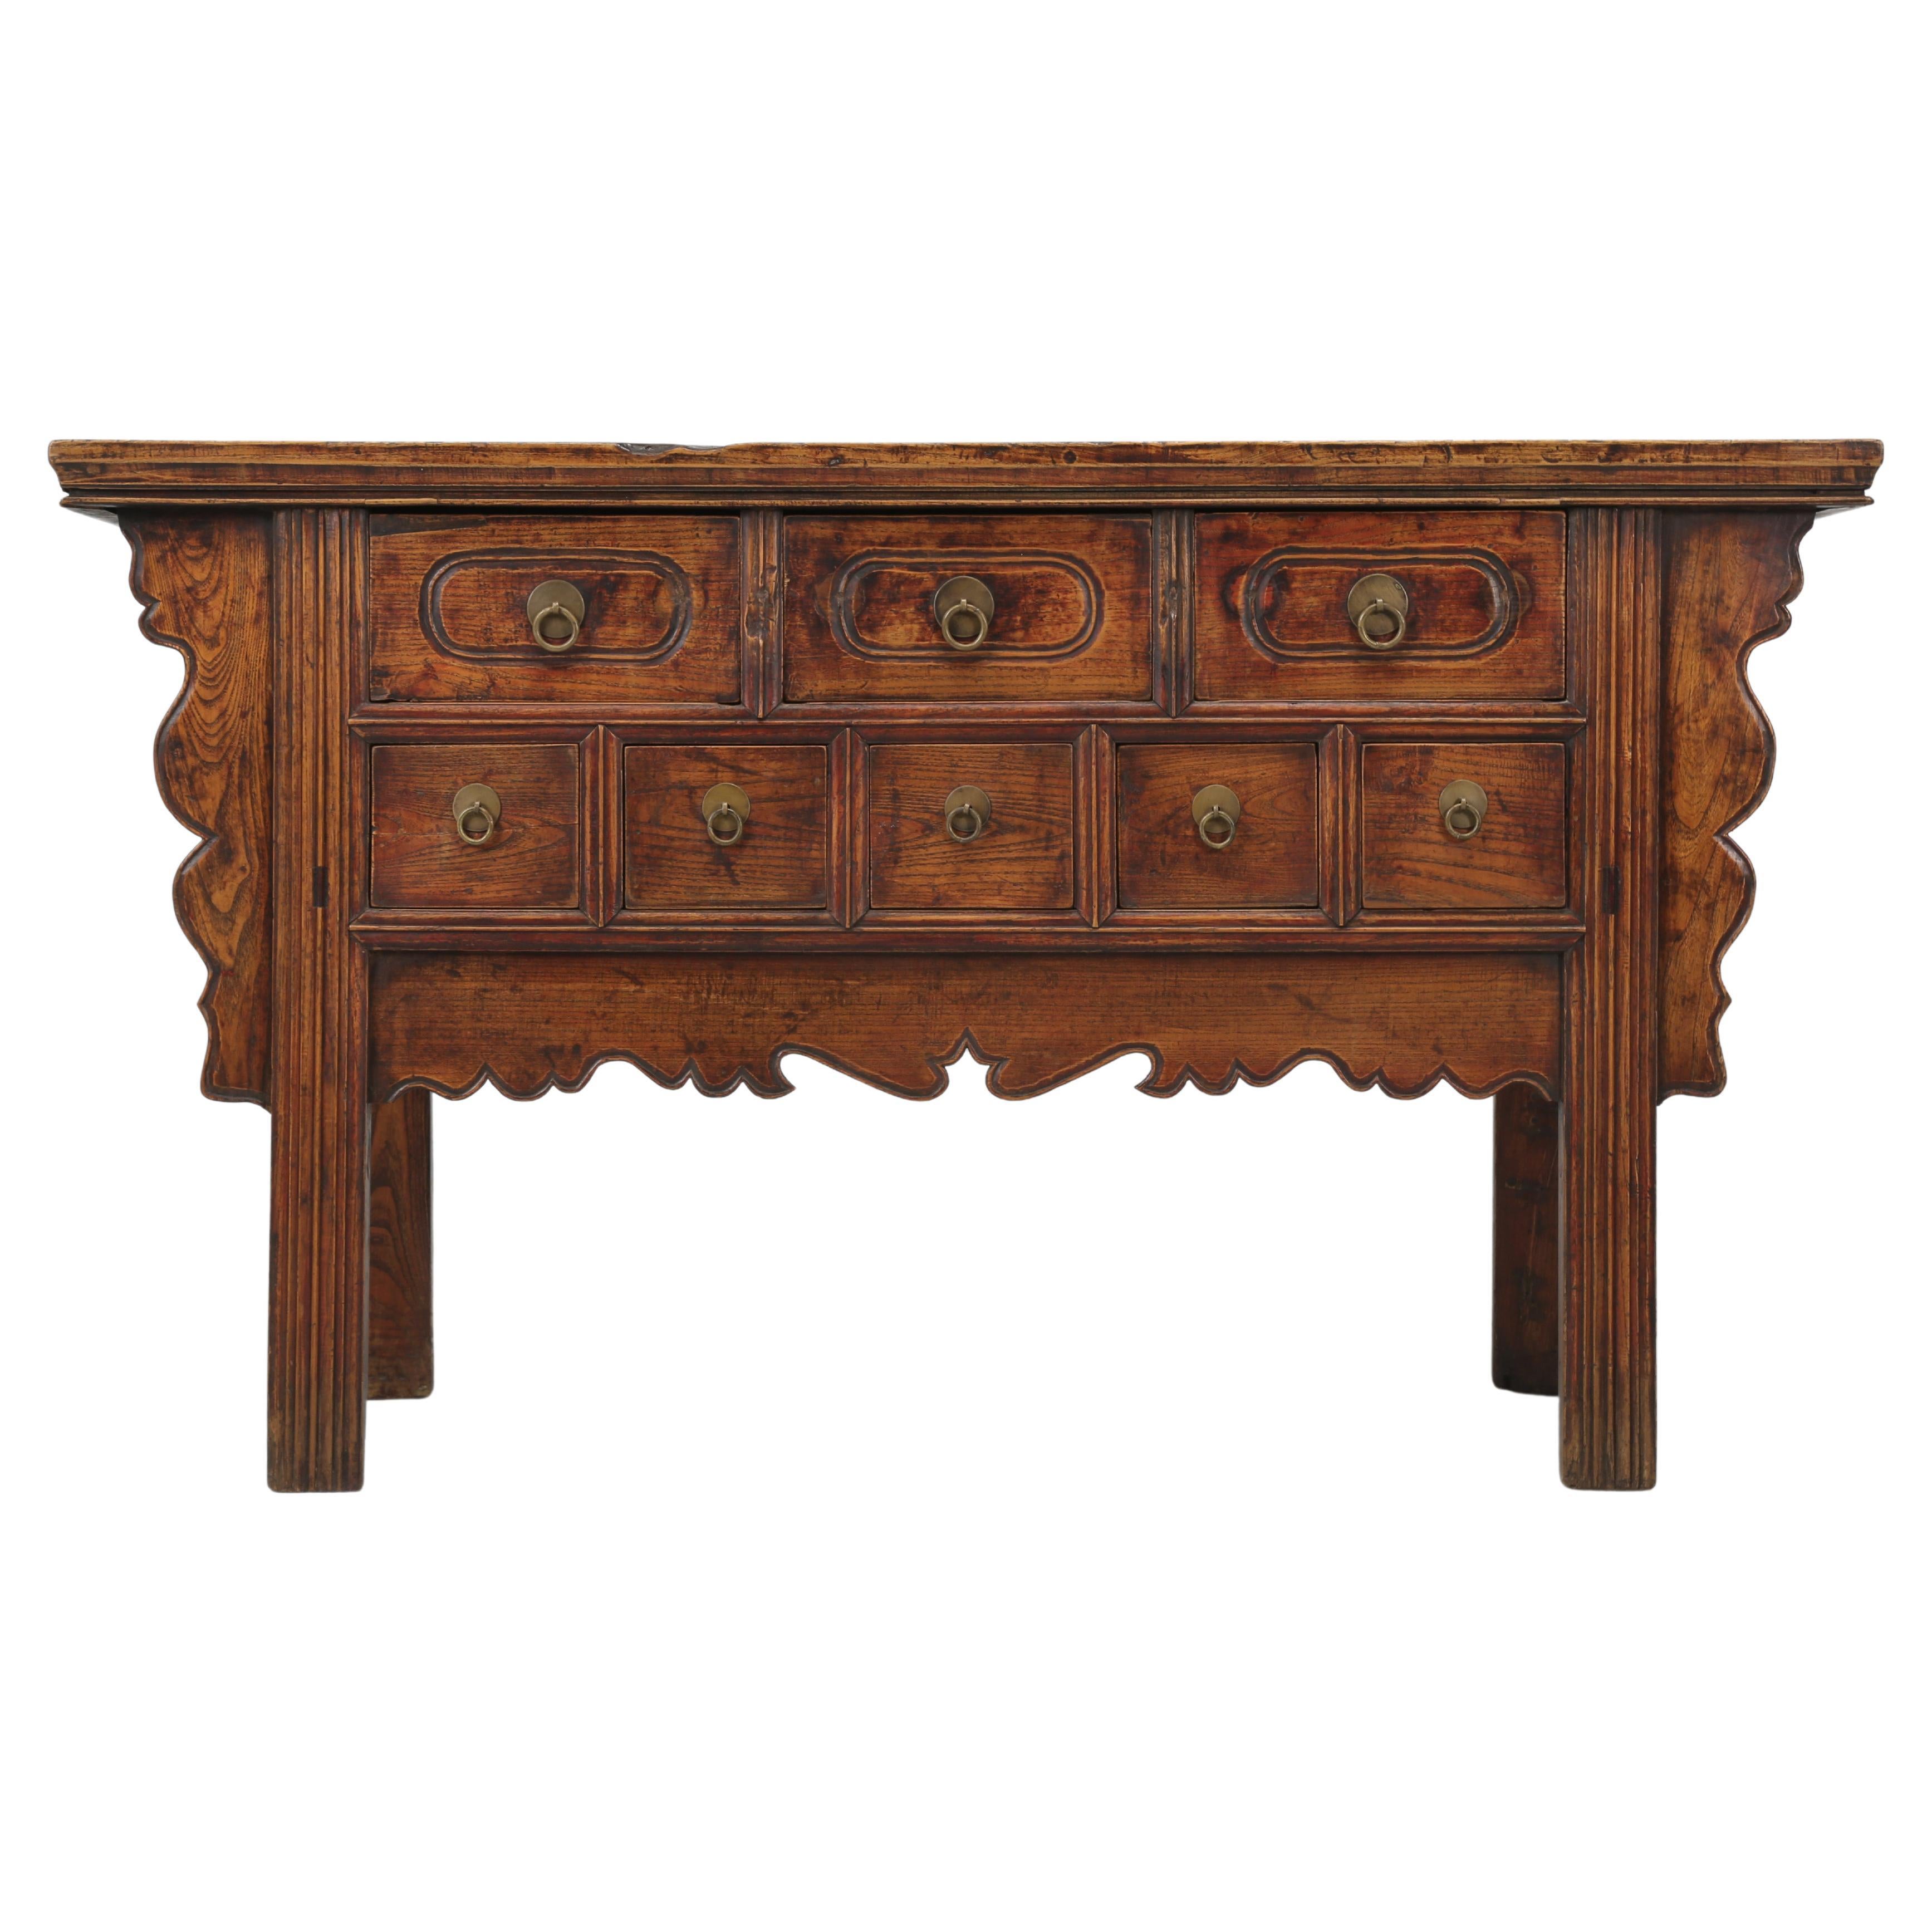 Antique Chinese Altar Table with (8) Drawers circa 1900 Restored Condition For Sale